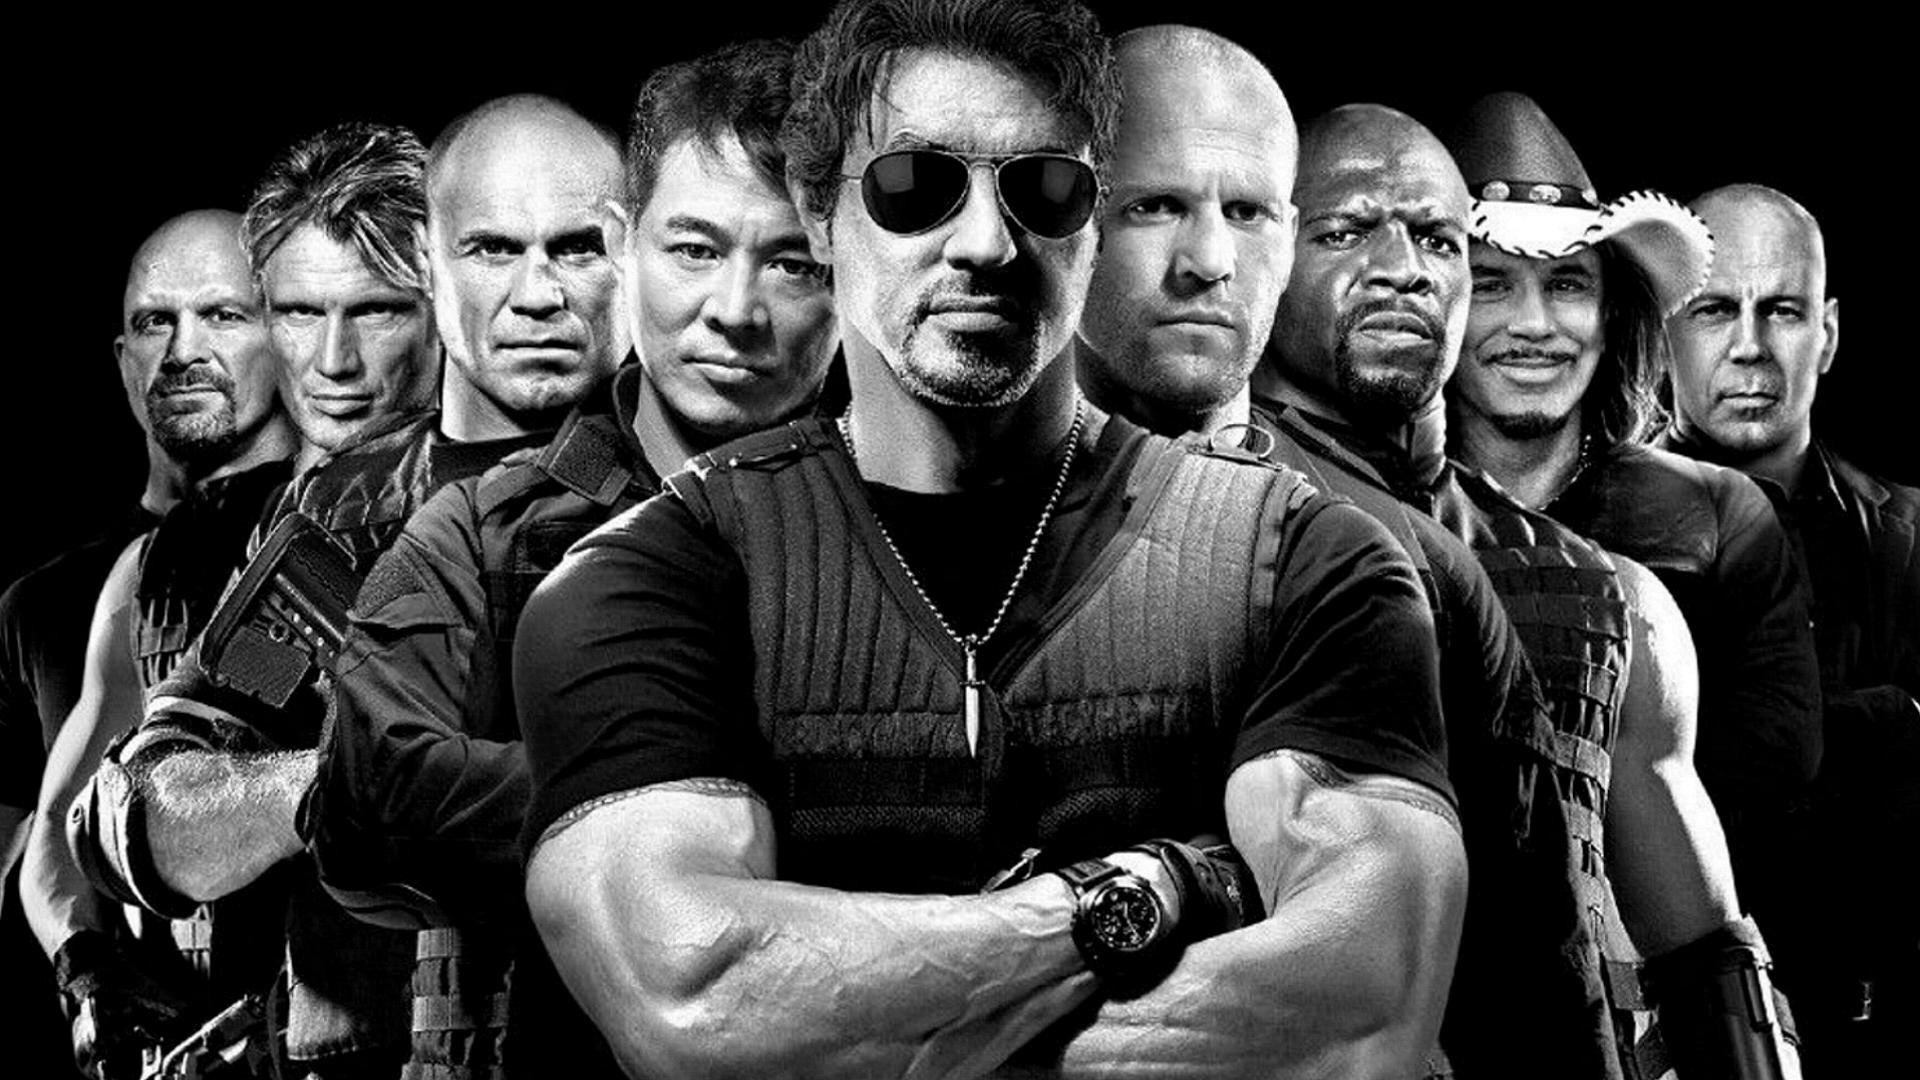 1920x1080 The Expendables images The Expendables HD wallpaper and background photos